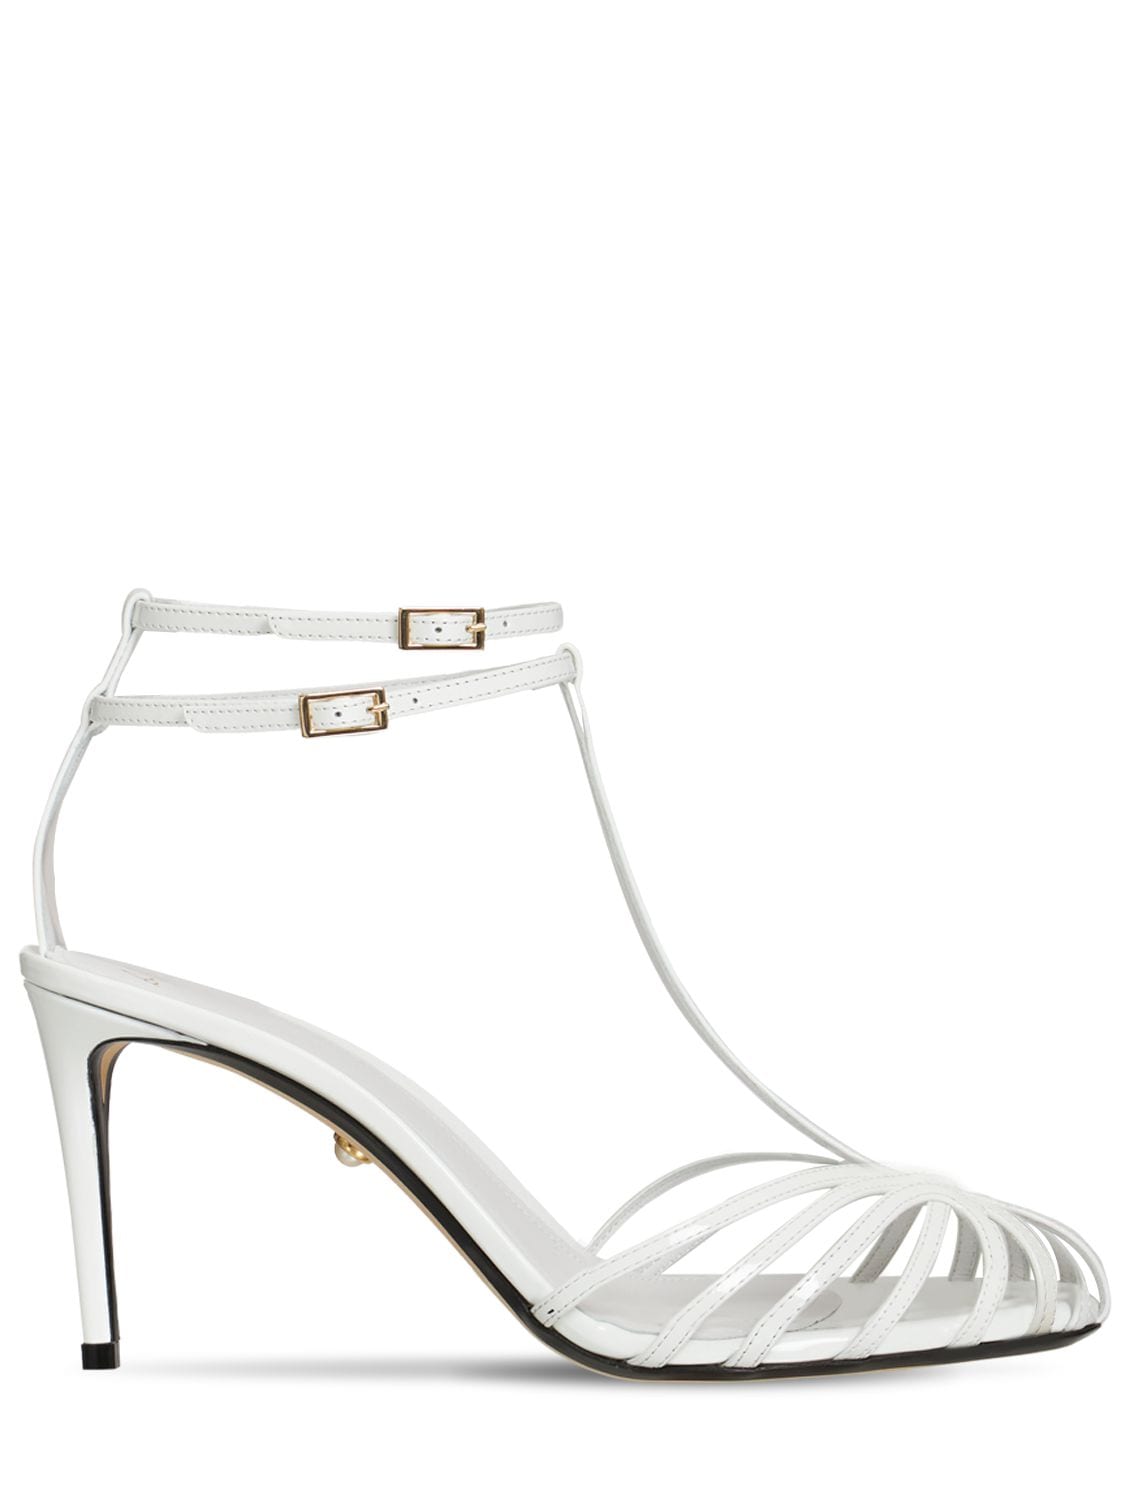 Alevì 80mm Anna Patent Leather Sandals In White